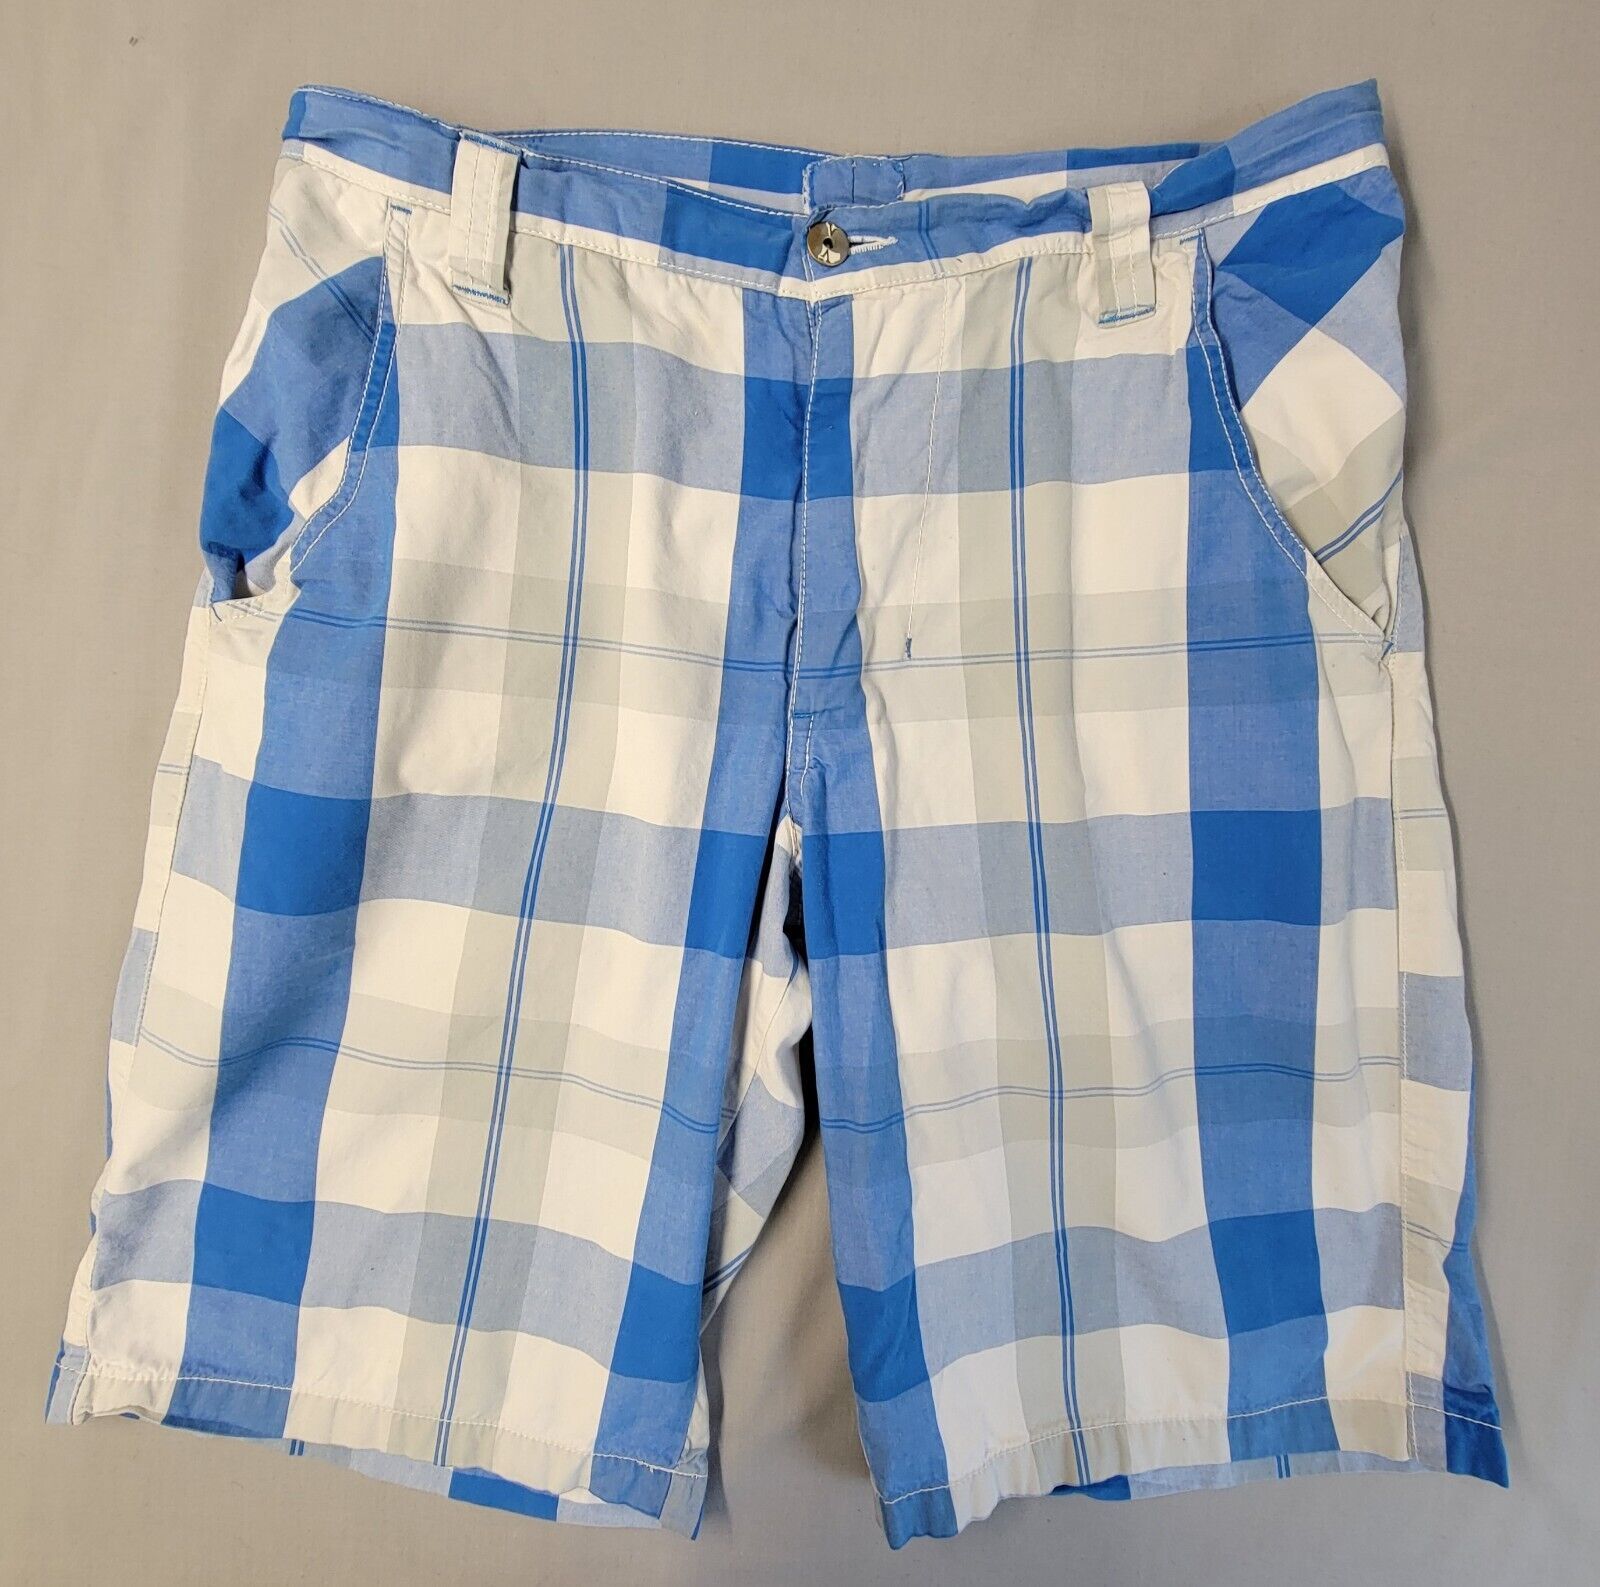 Primary image for Mens Vurt Blue Plaid Shorts Size 34W Chino Style Flat Front